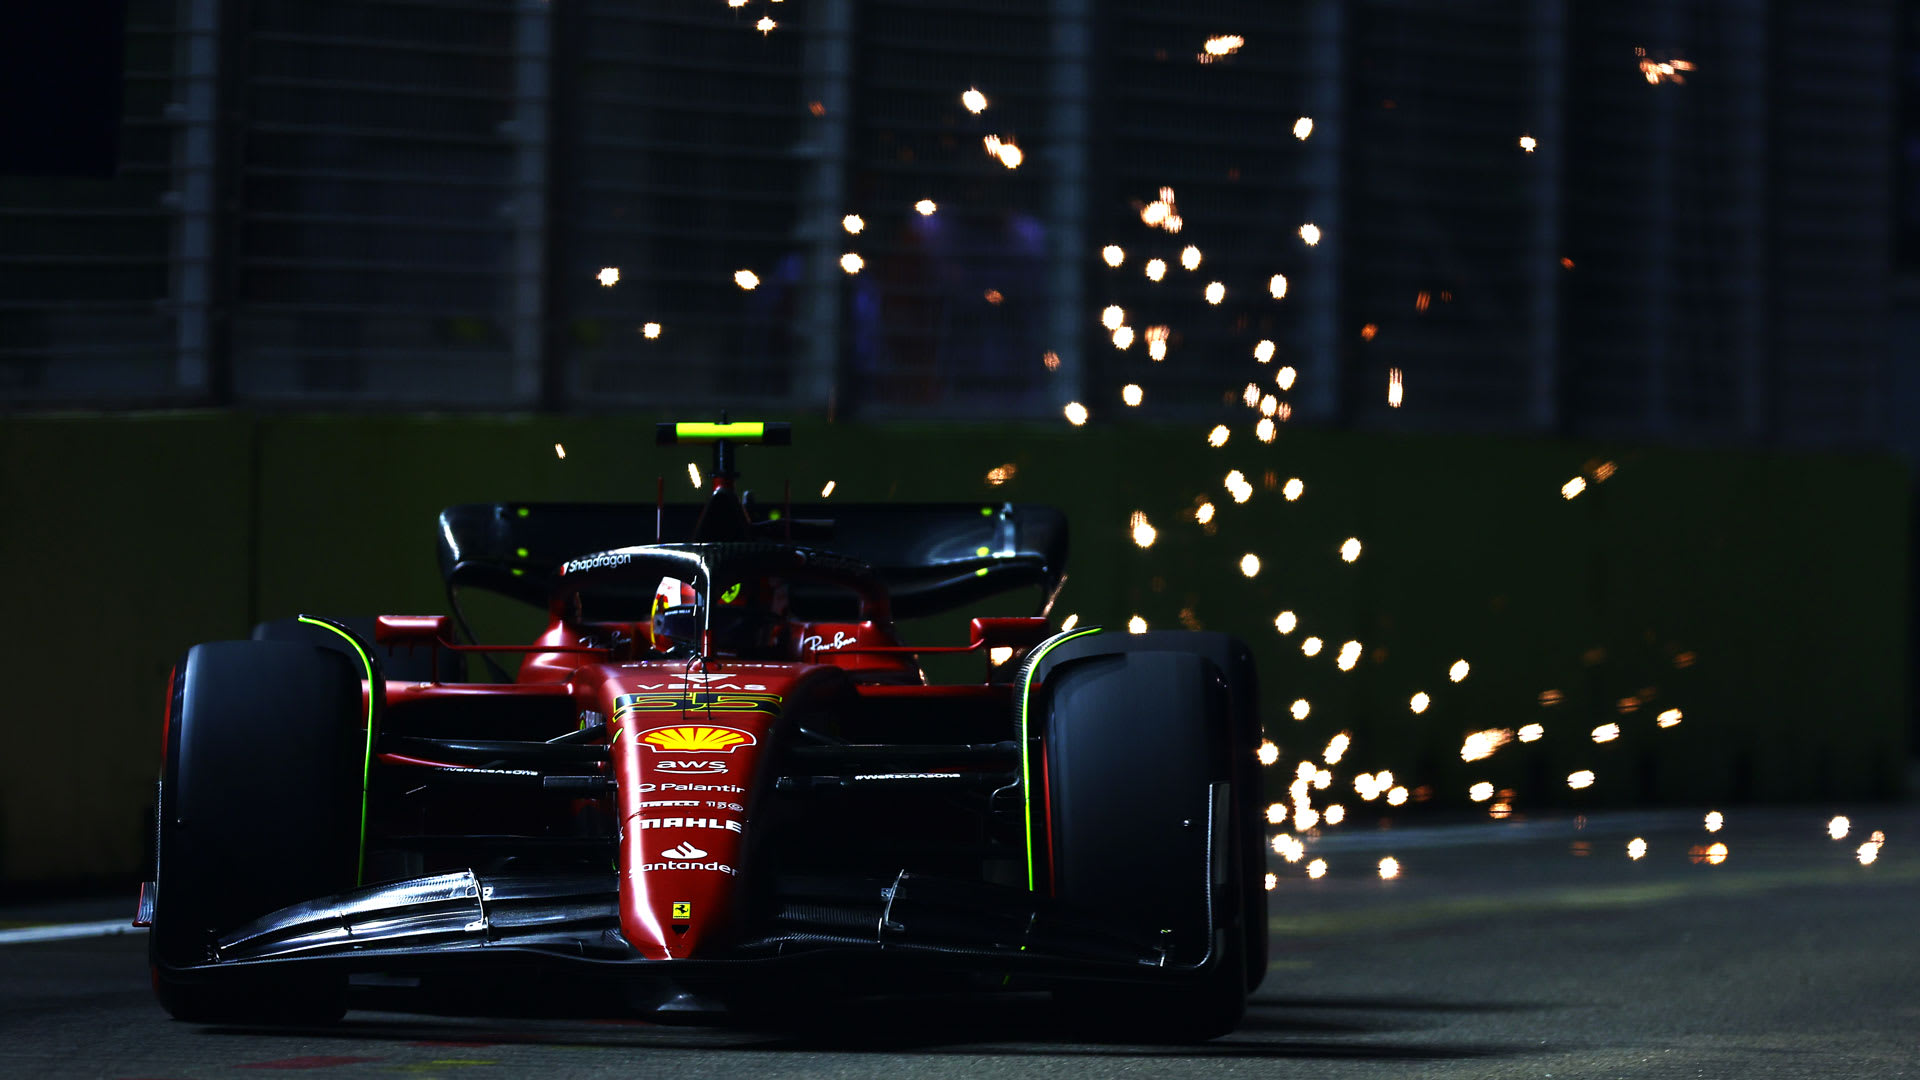 2022 Singapore Grand Prix FP2 report and highlights: Sainz leads Leclerc as Ferrari post 1-2 in second practice